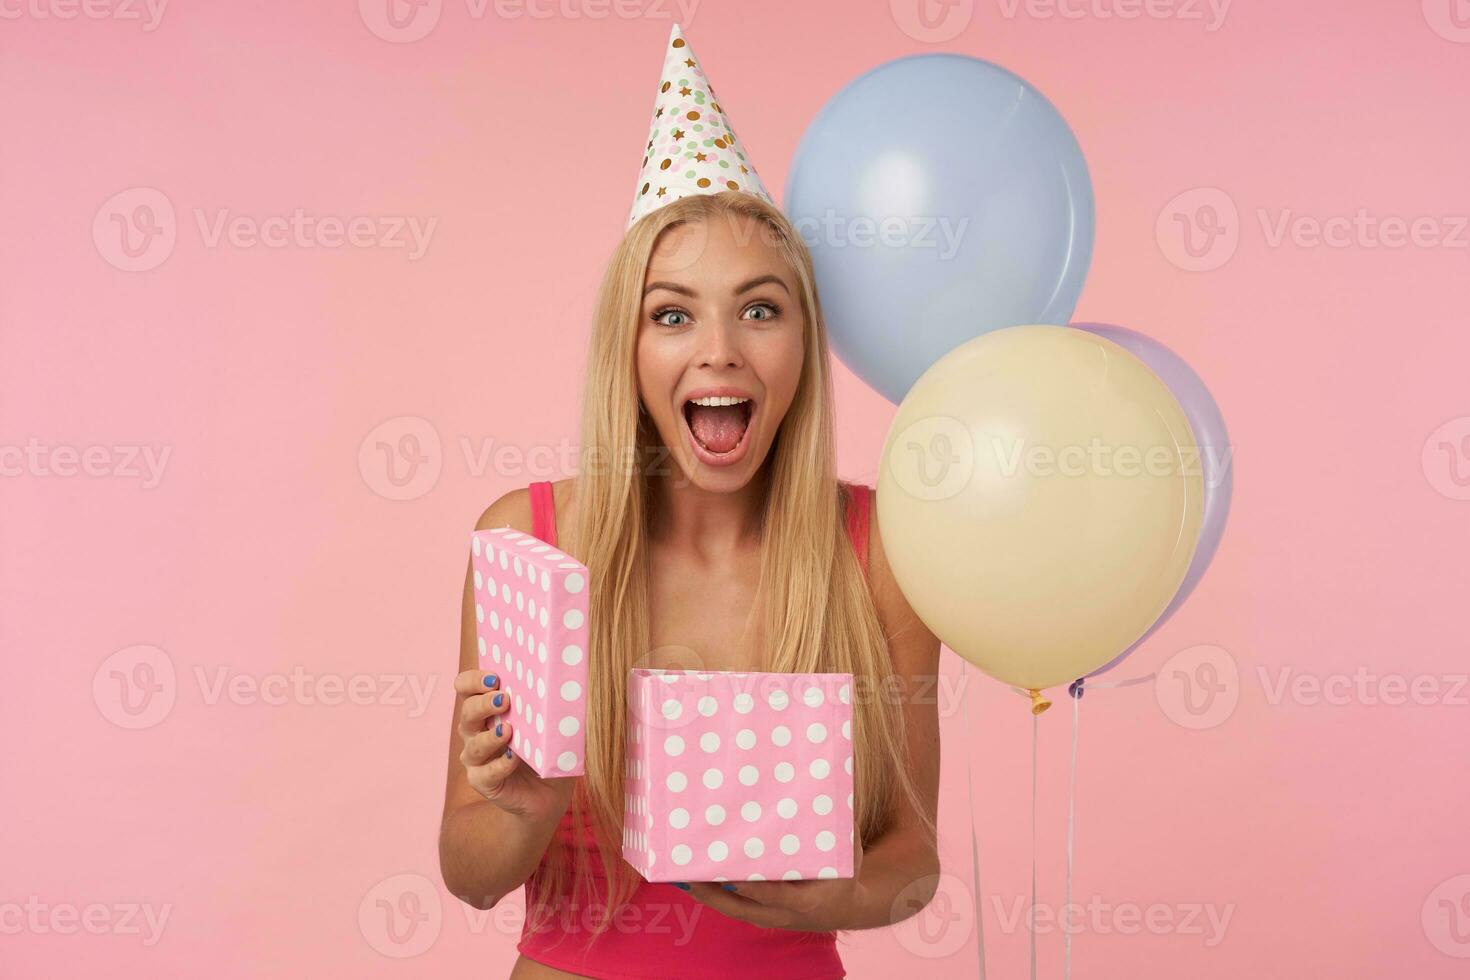 Overjoyed pretty young blonde woman lady with casual hairstyle showing happy reaction on getting awesome present, posing over pink background in birthday hat,looking at camera with wide cheerful smile photo